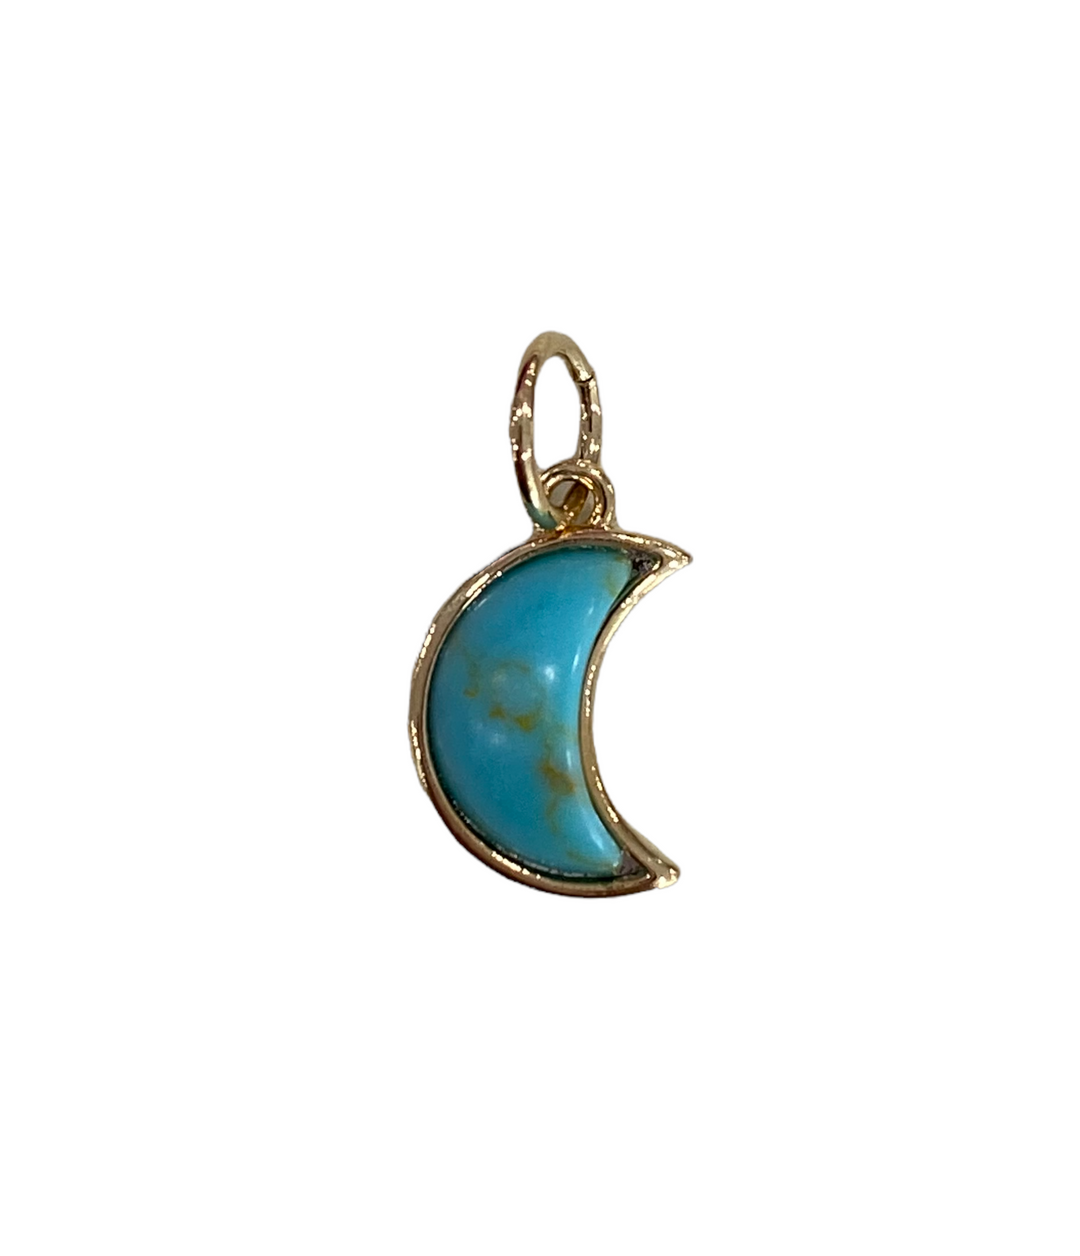 GOLD TURQUOISE CRESENT MOON CHARM - Kingfisher Road - Online Boutique